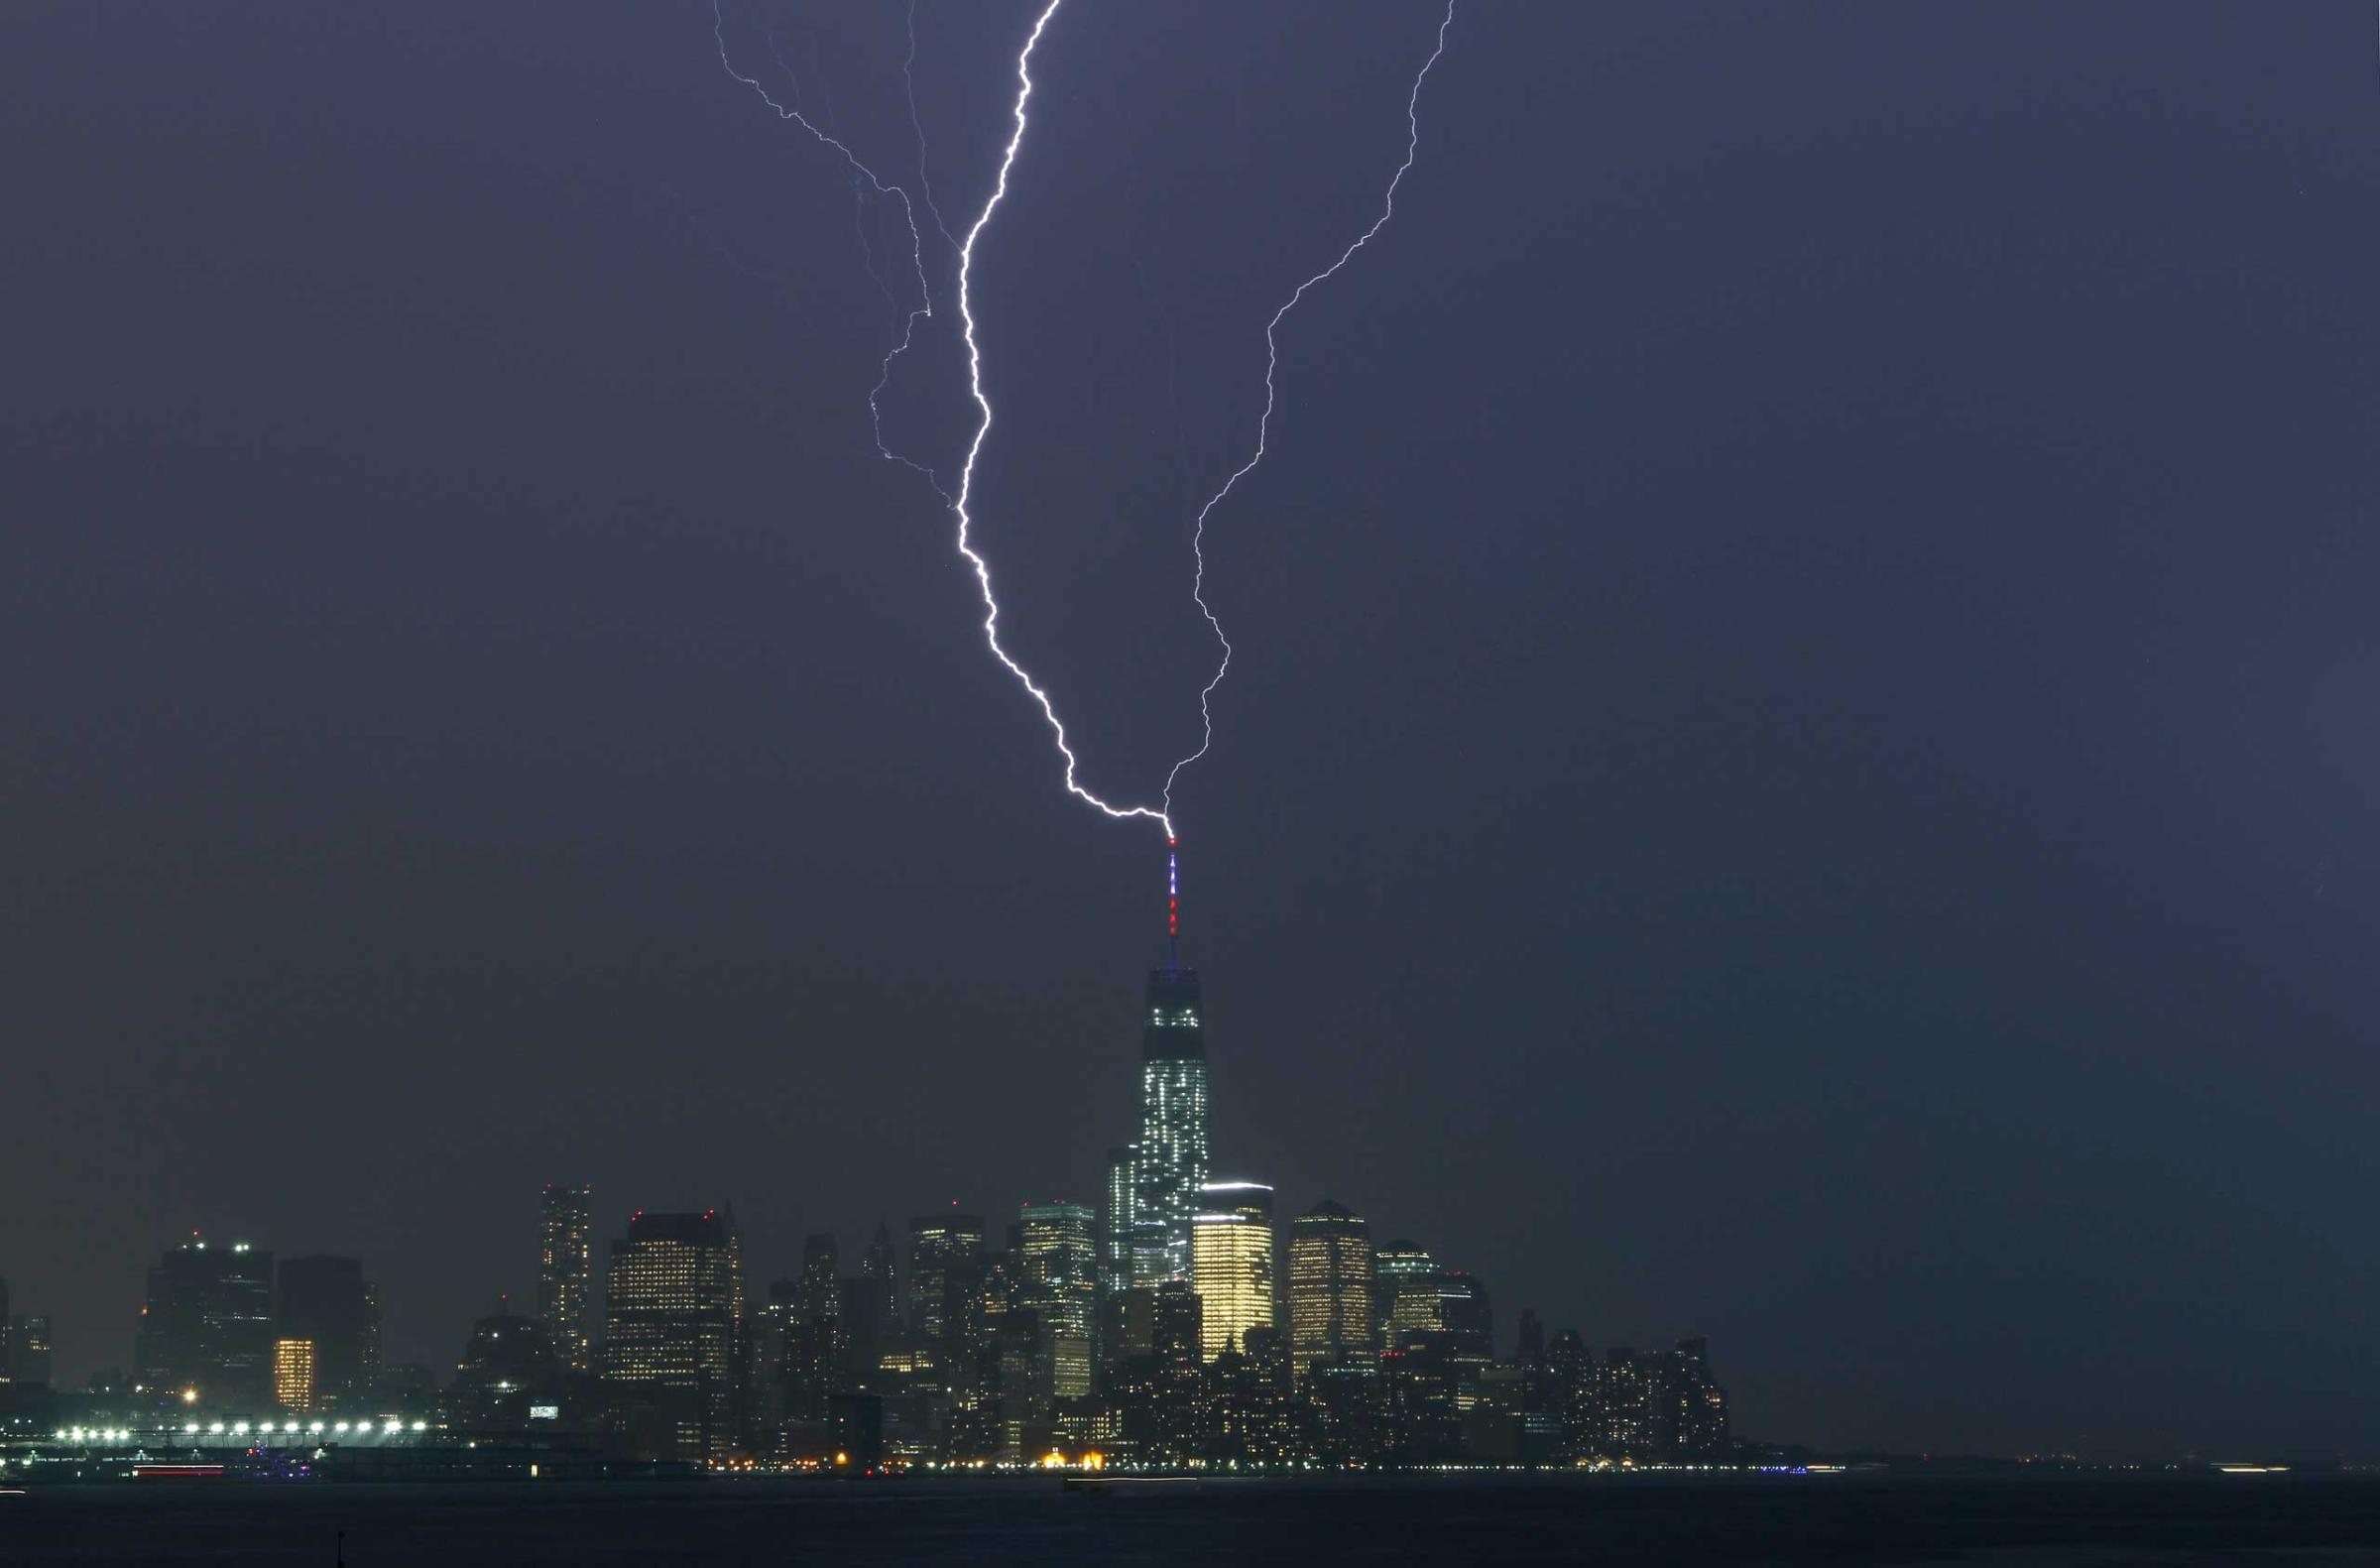 Two bolts of lightning hit the antenna on top of One World Trade Center, New York, May 23, 2014.